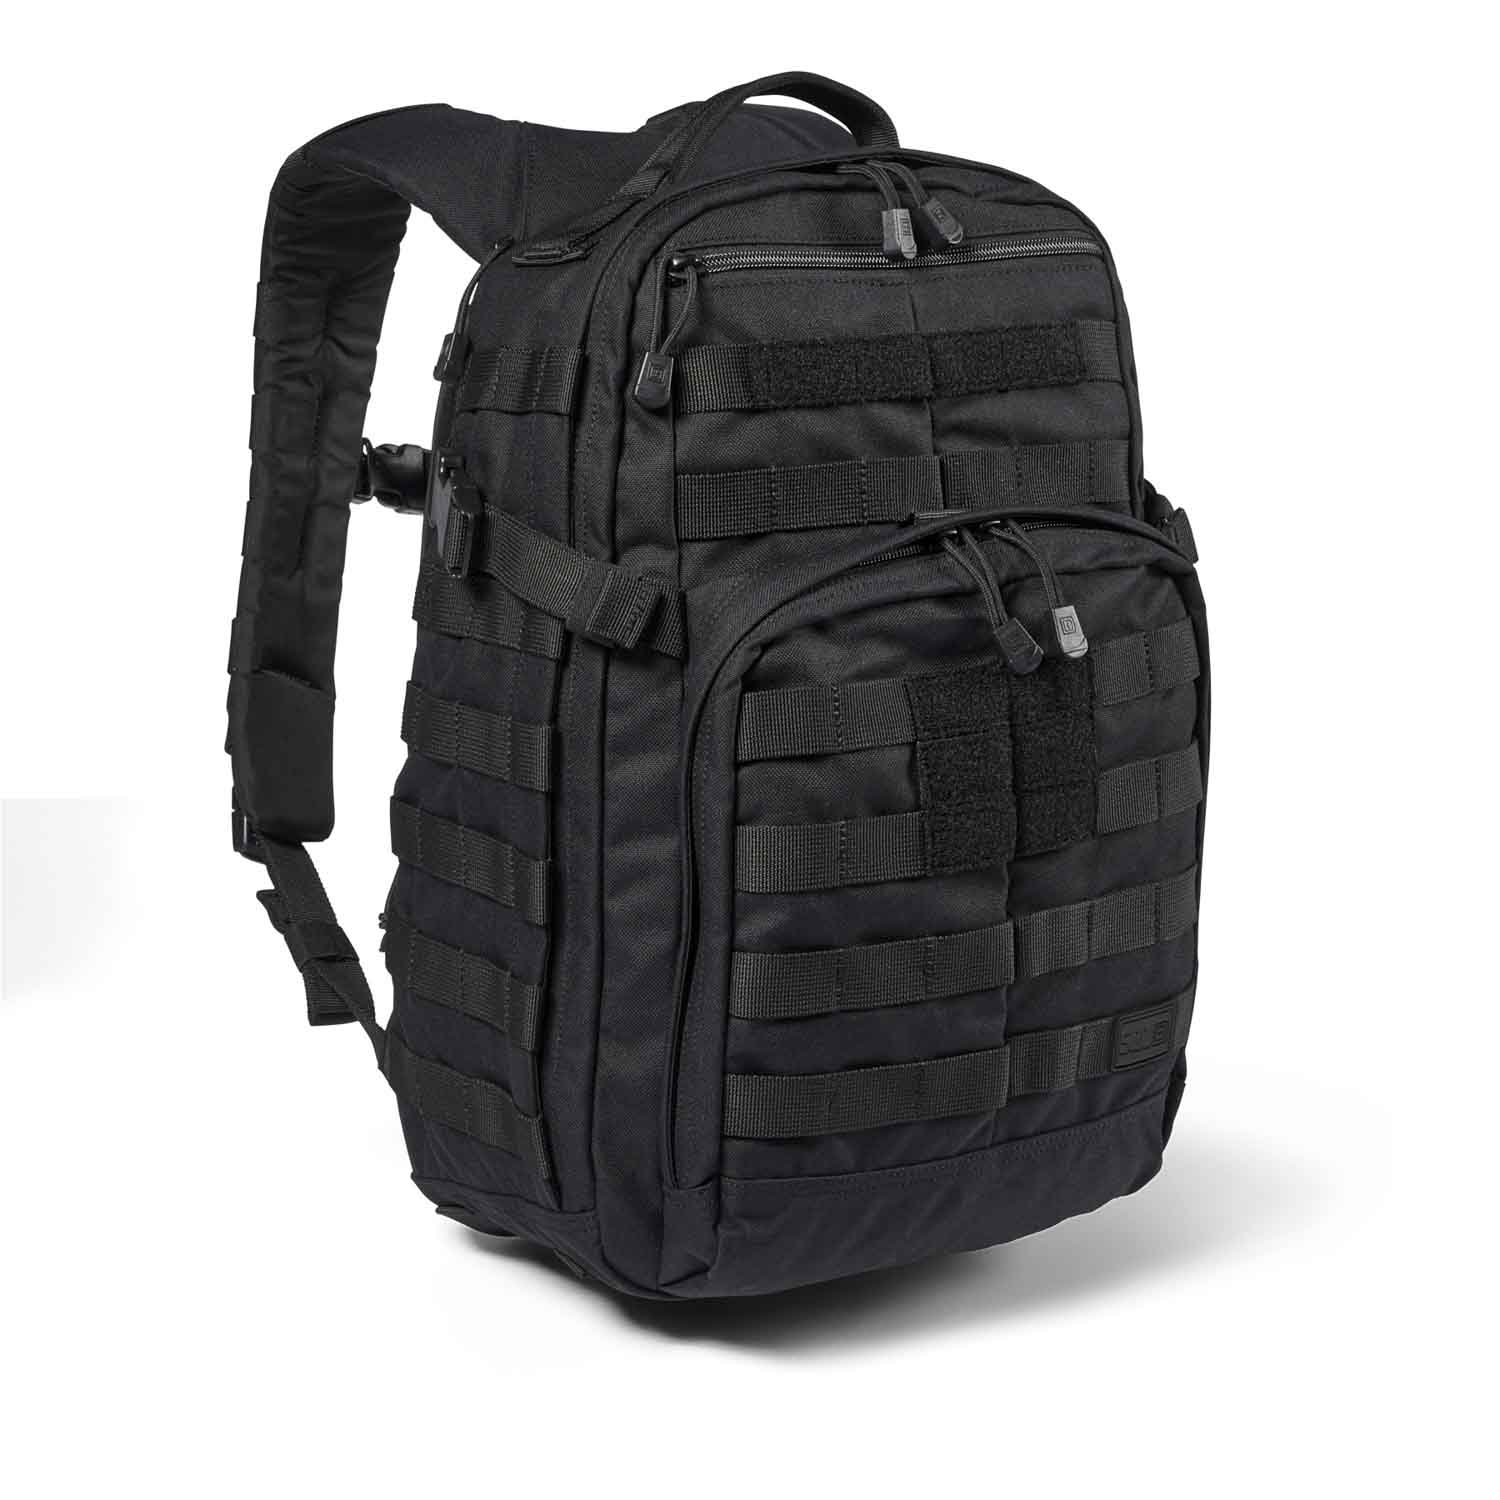 5.11 TACTICAL RUSH 12 2.0 BACKPACK